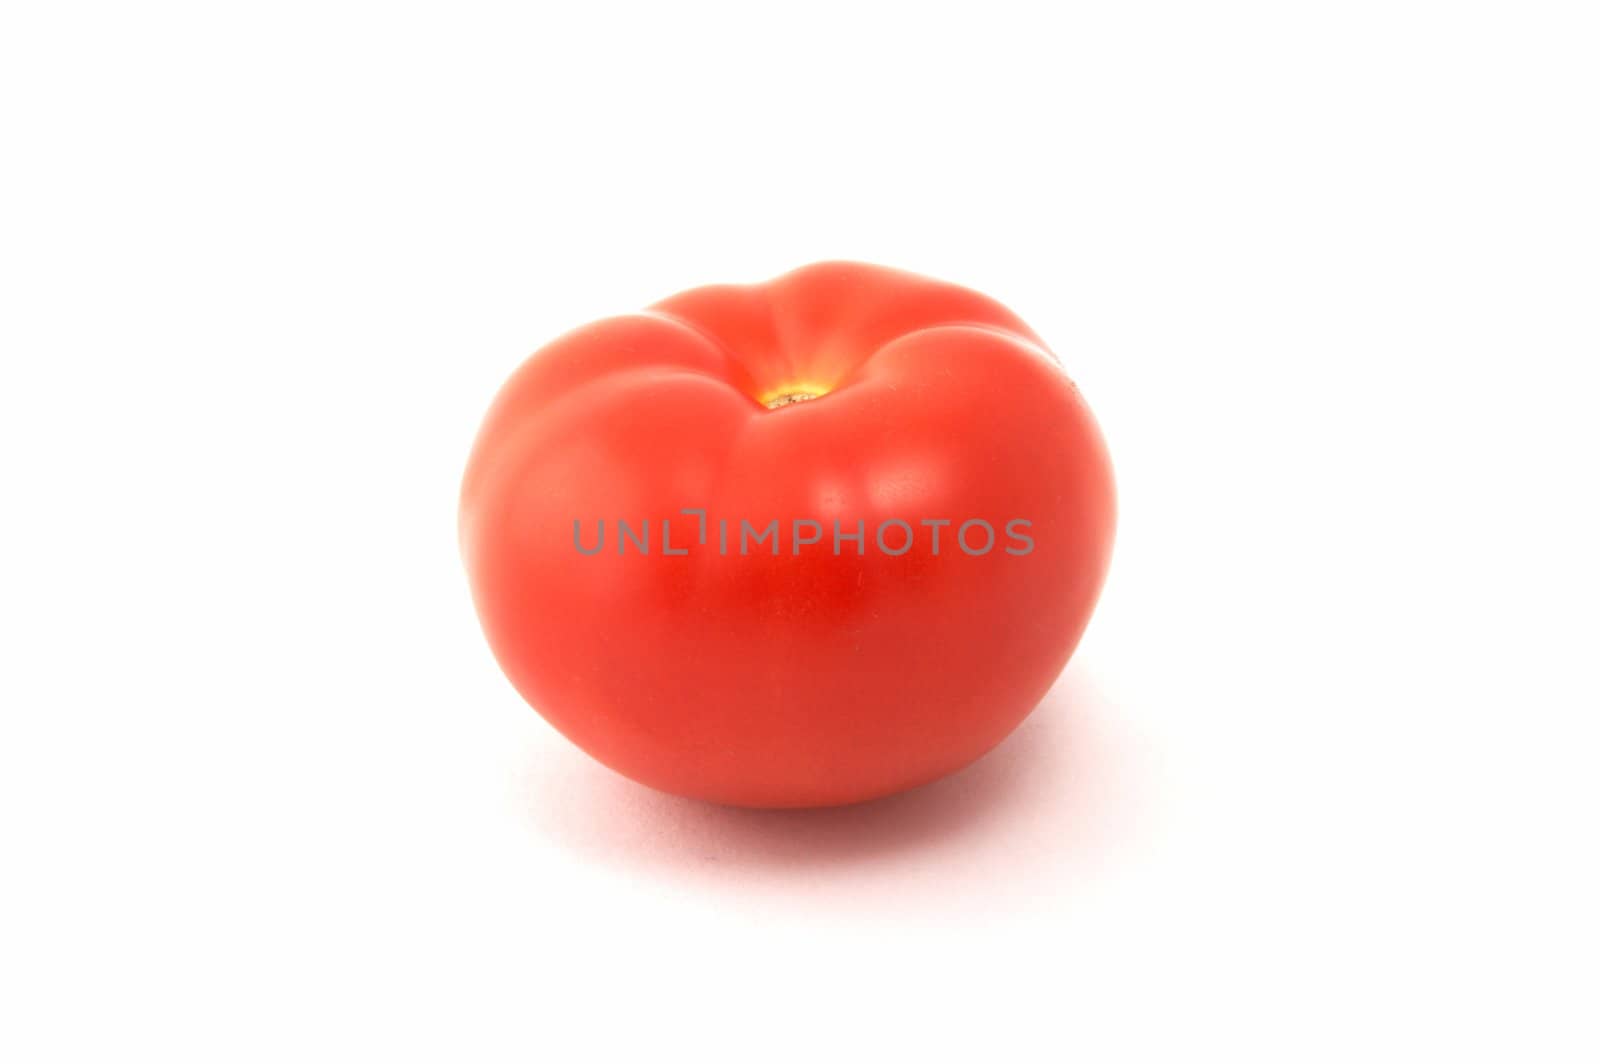 Red tomato by holligan78